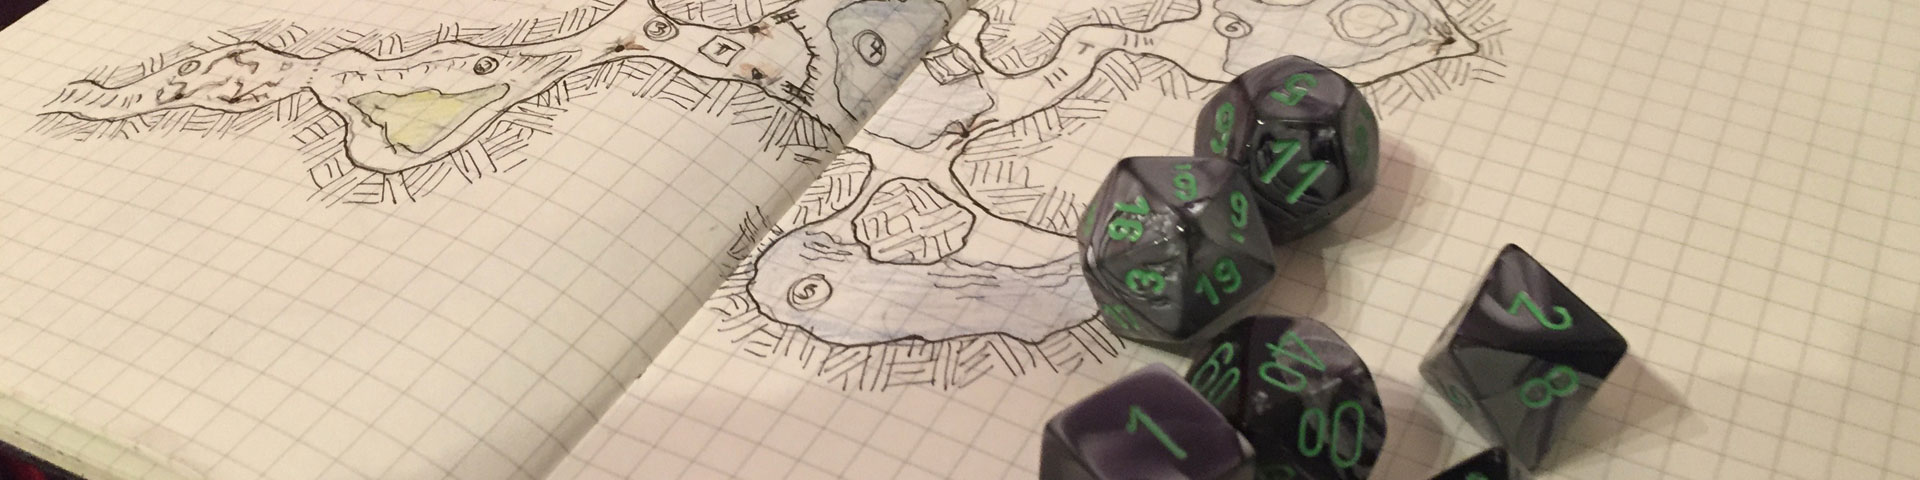 Green and grey dice sit atop a hand-drawn dungeon map.